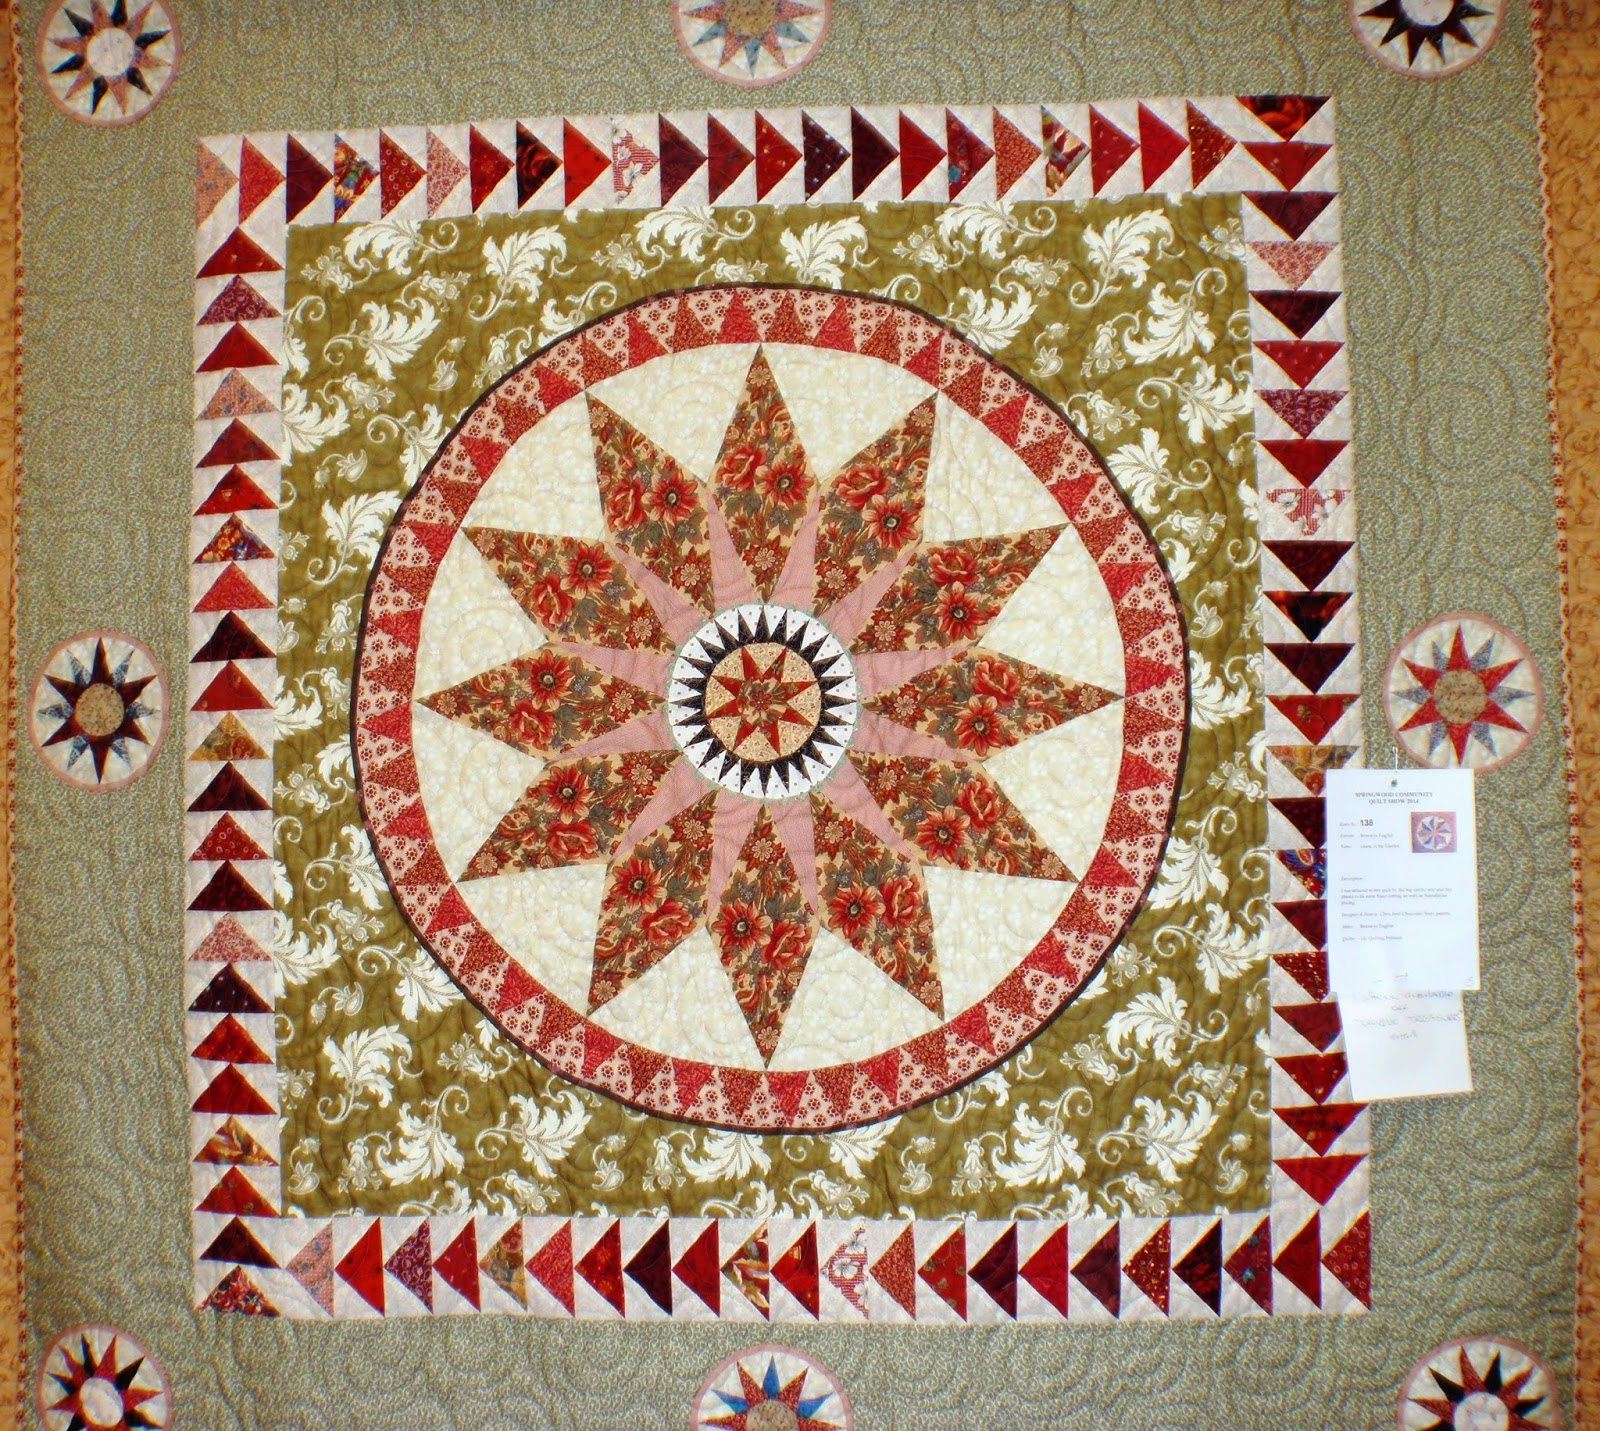 Patchwork Fundamentals: What makes a great quilt show?